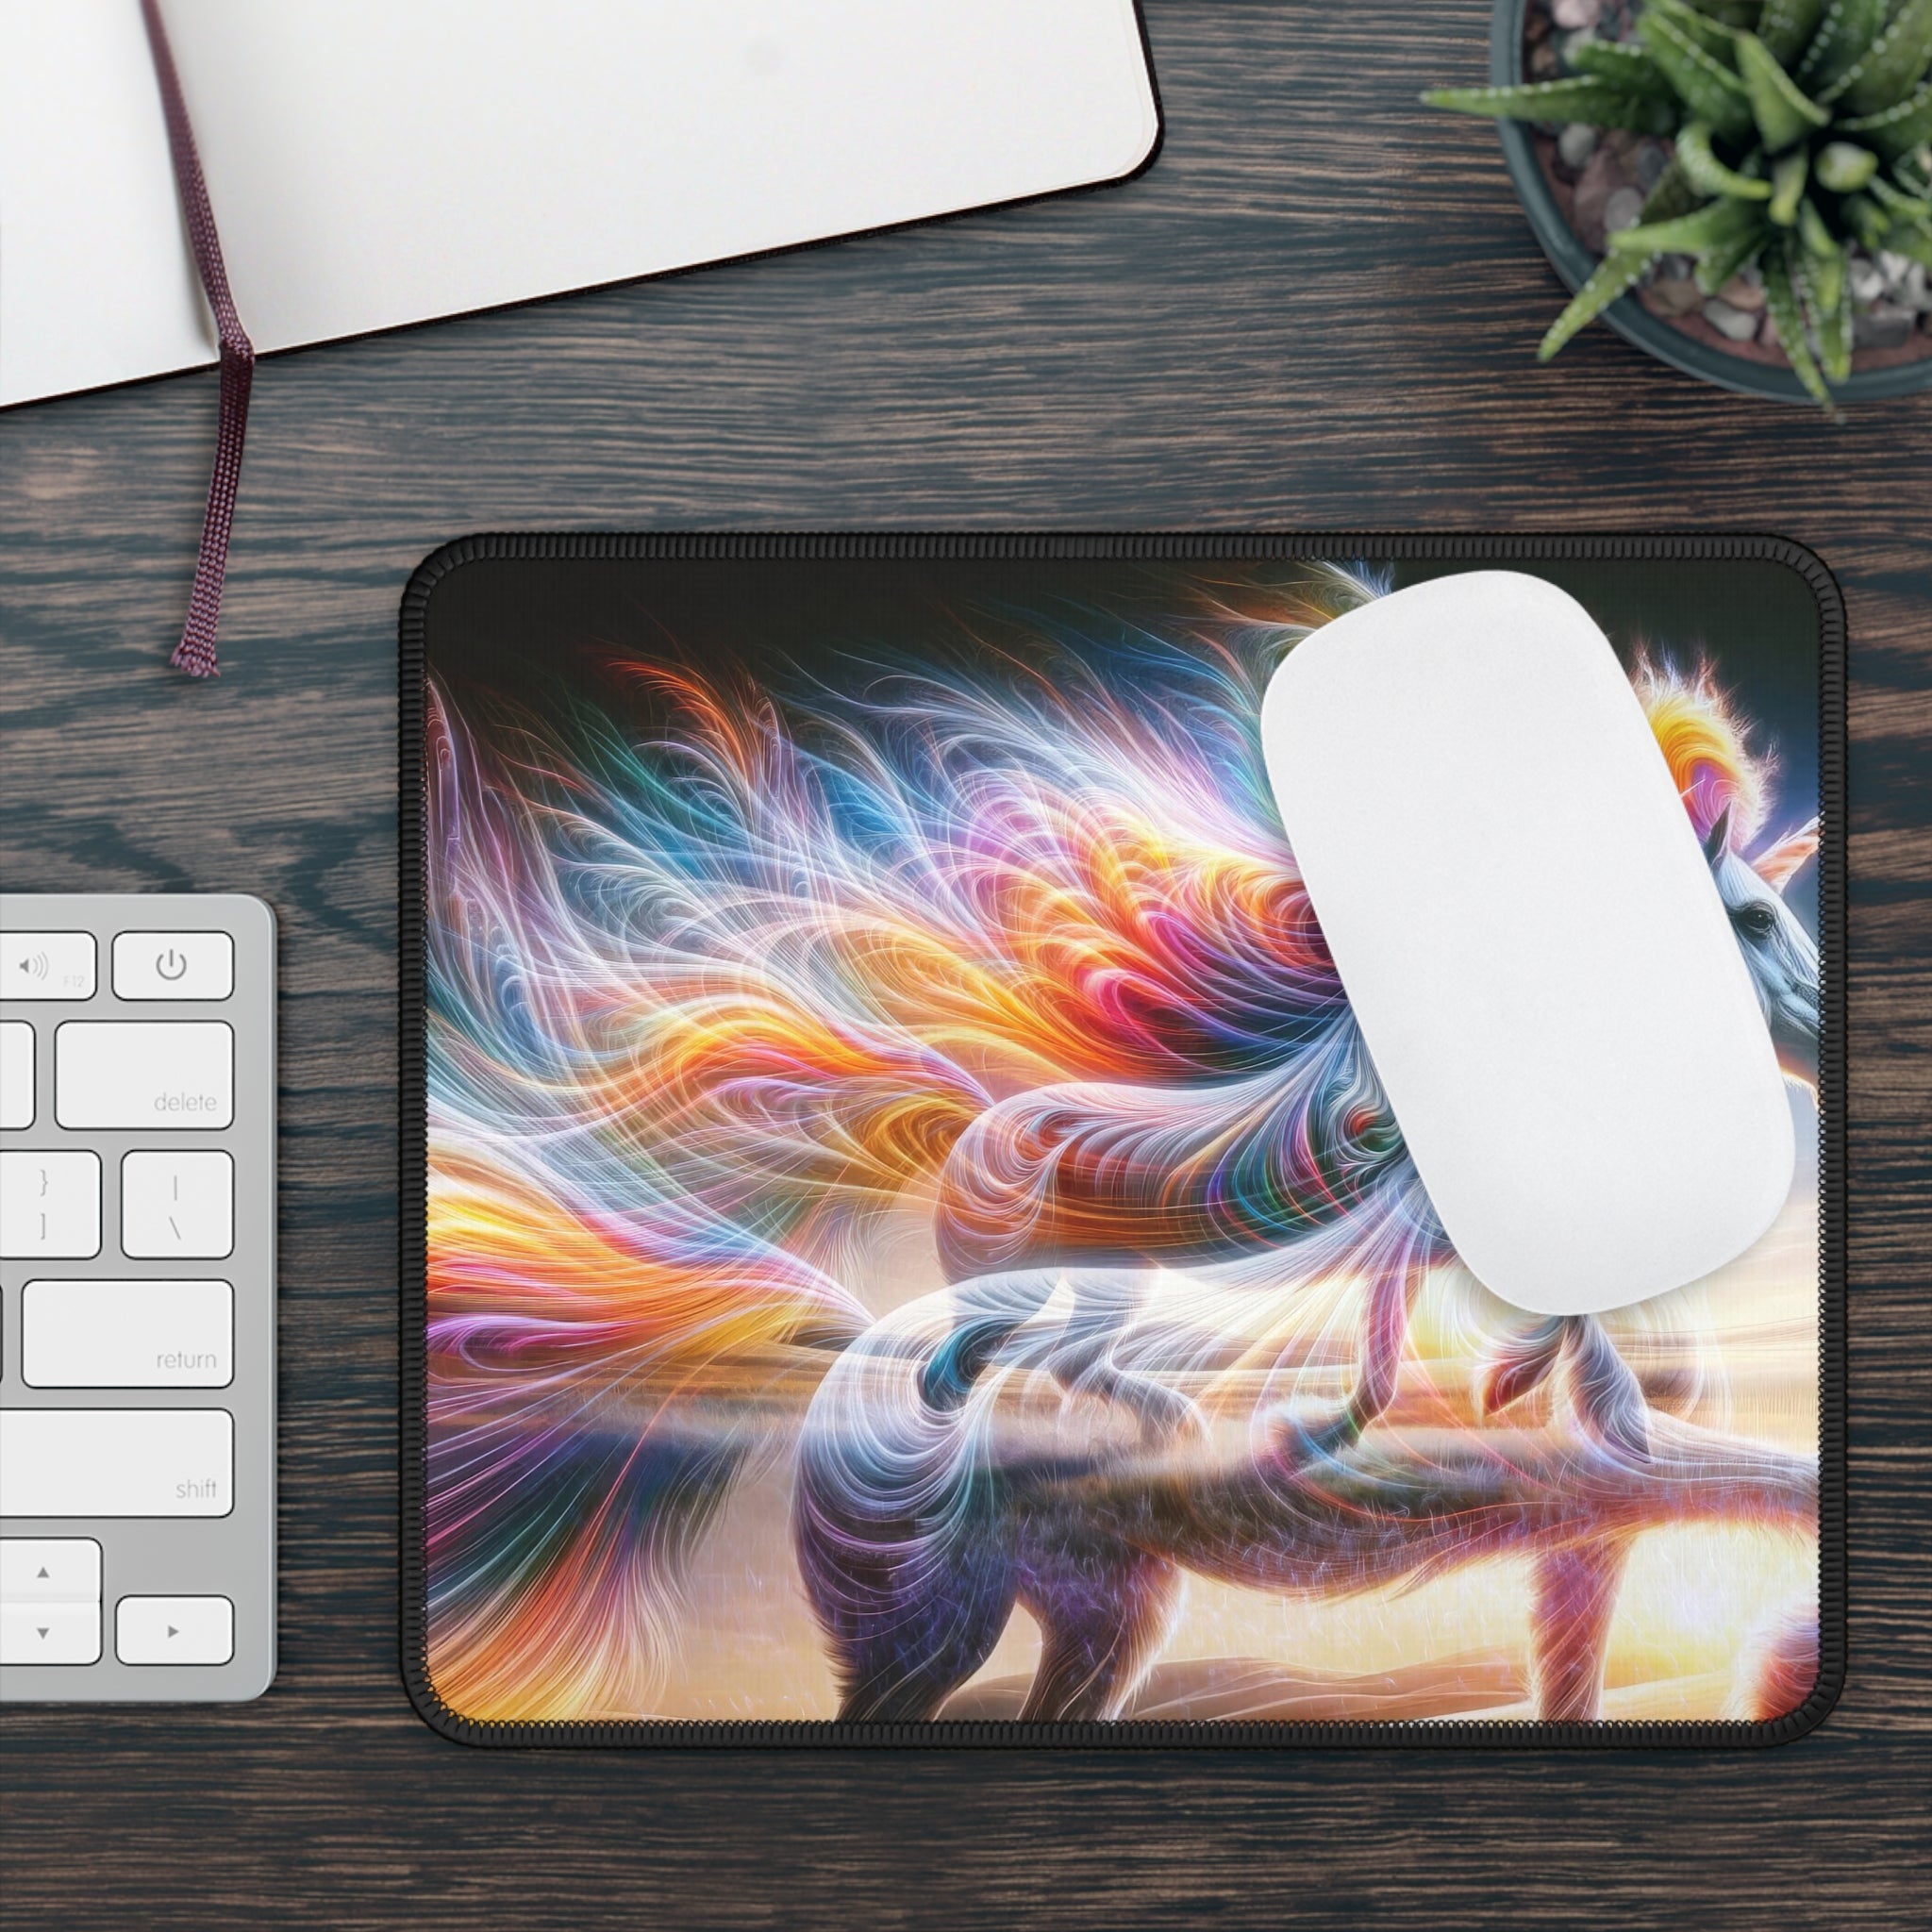 A Tale of Two Realms Gaming Mouse Pad